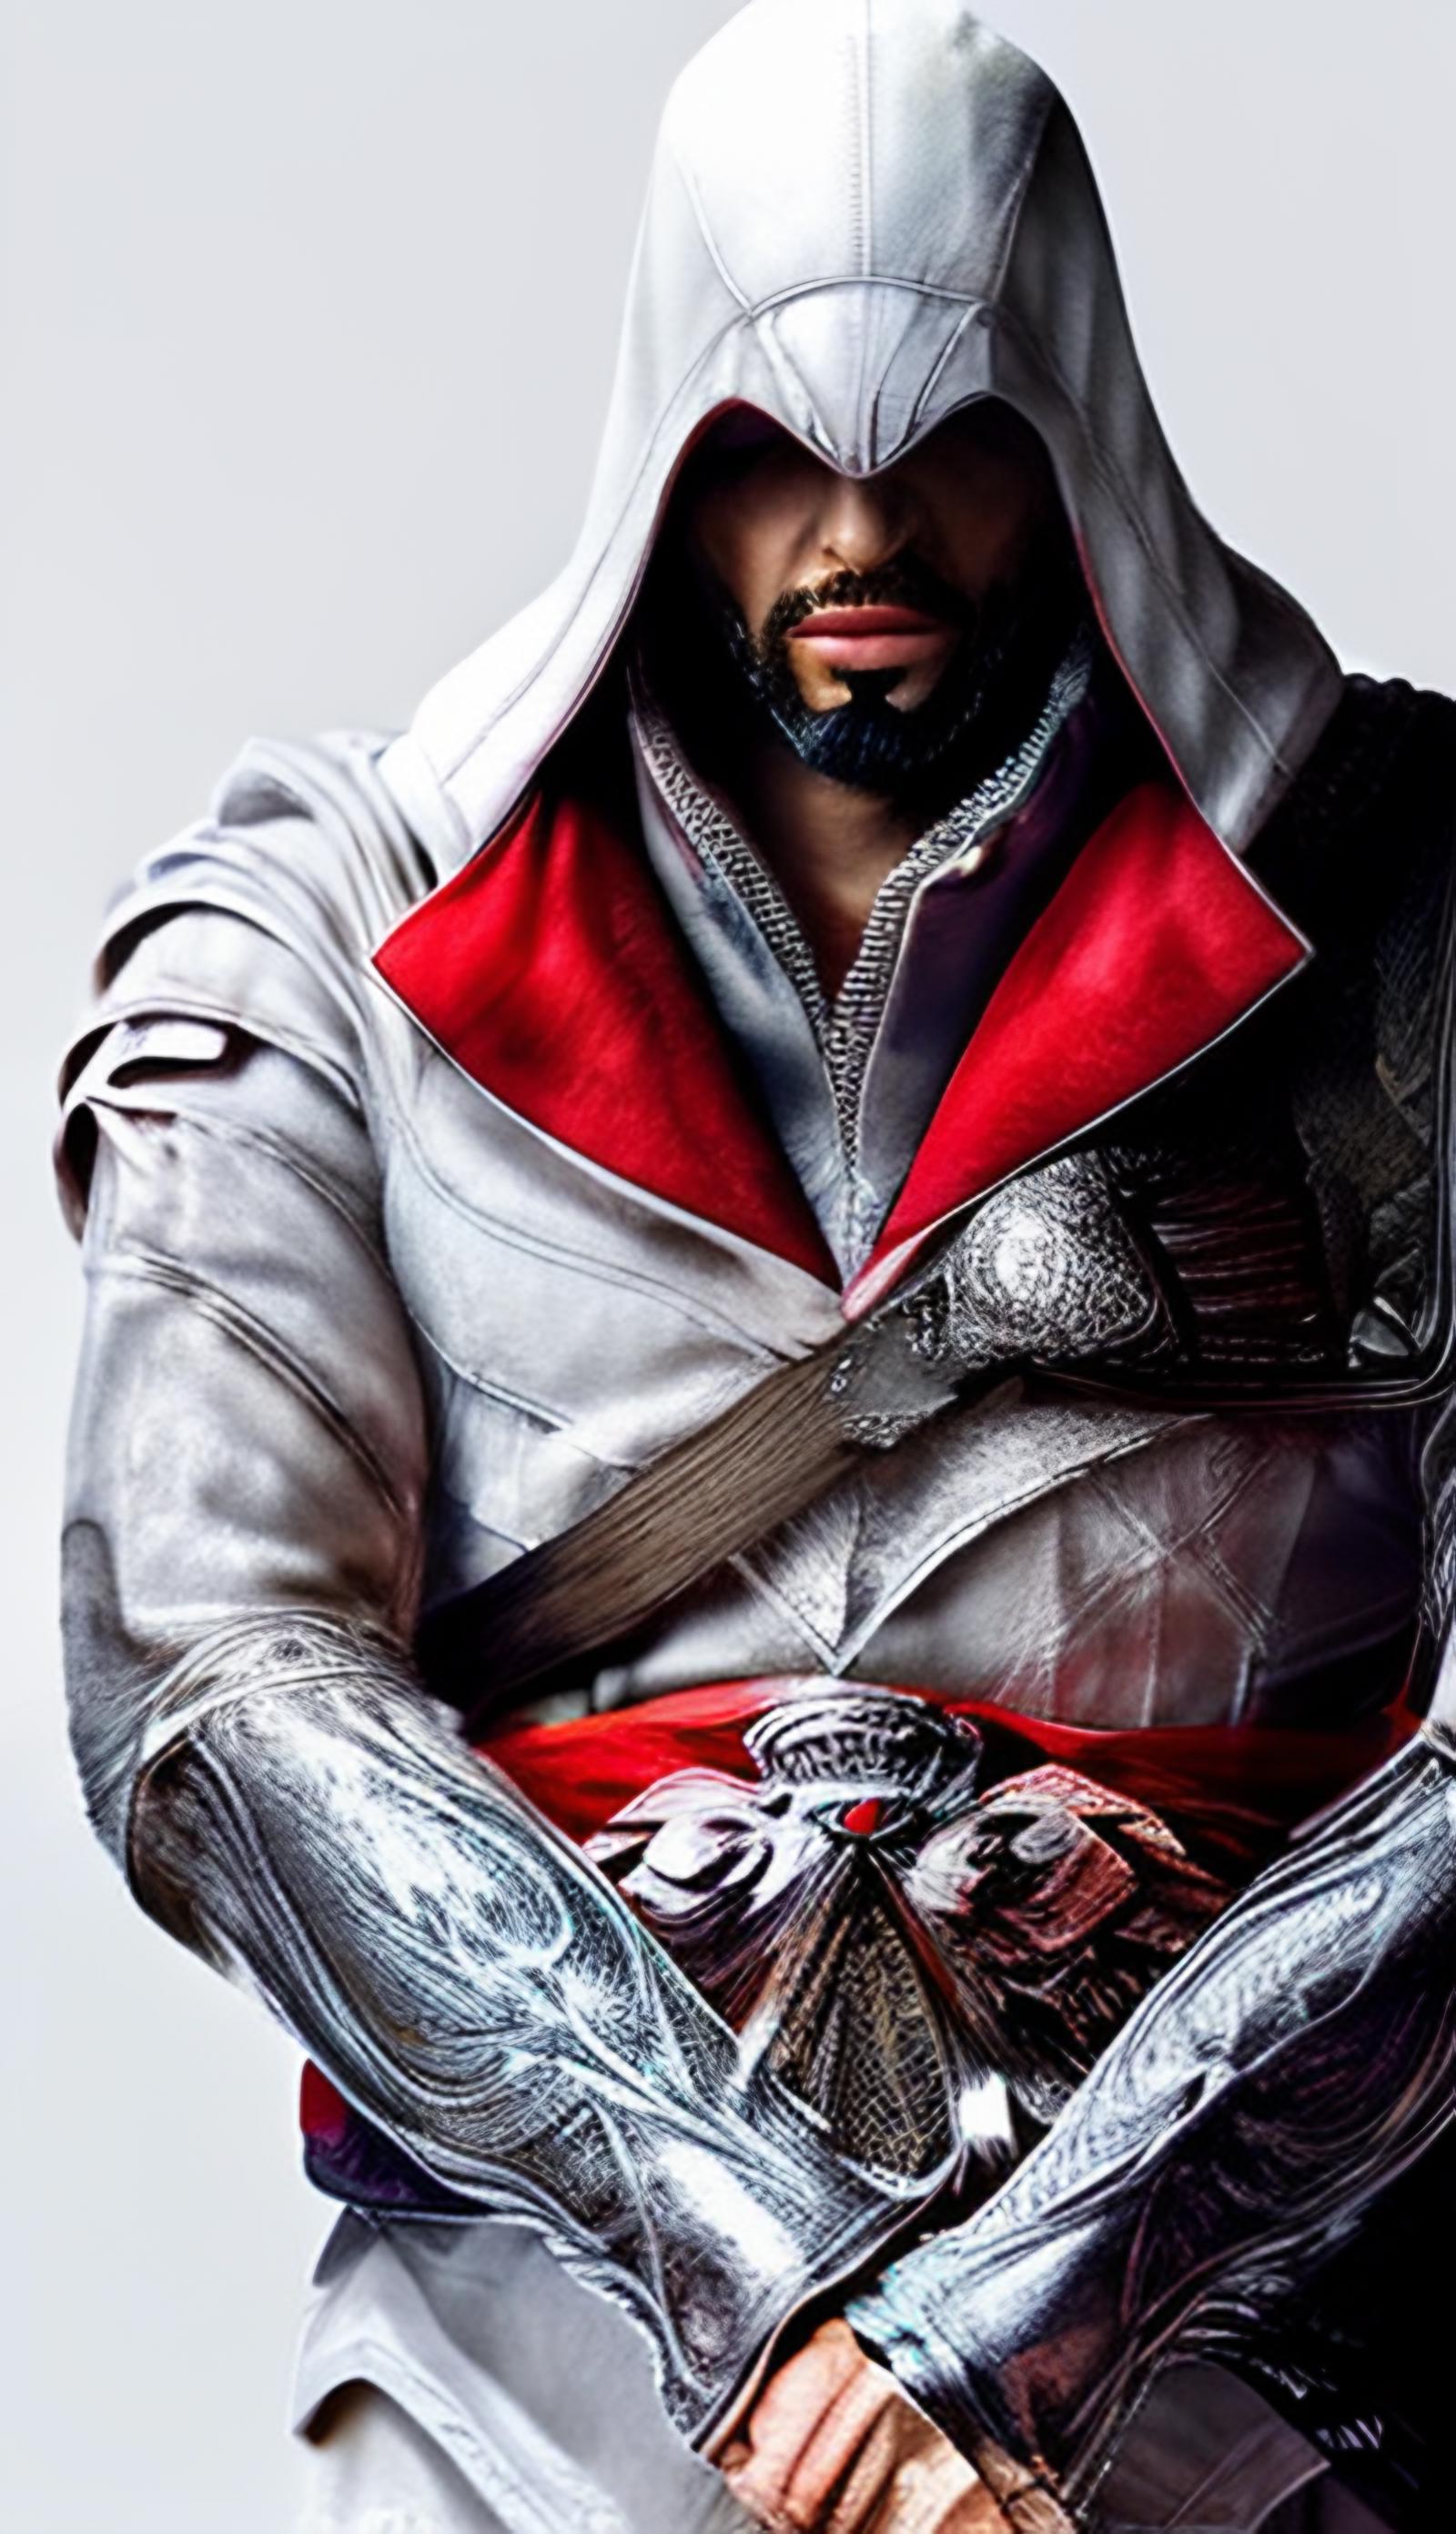 Ezio Auditore | Assassin's Creed Franchise image by Diroverlay